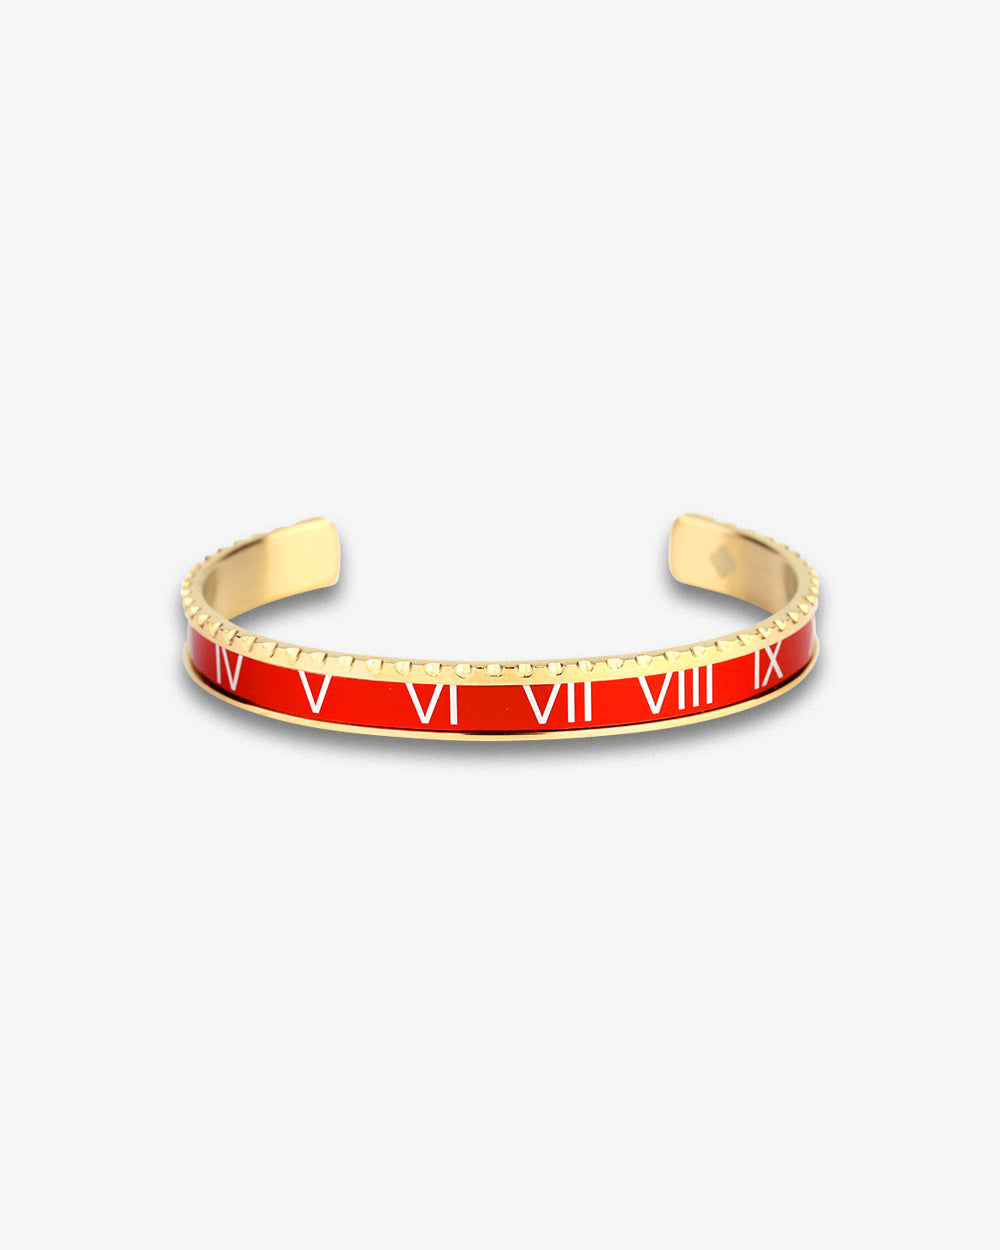 Swiss Concept Classic Roman Numeral Speed Bracelet (Red & Yellow Gold) - Stainless Steel